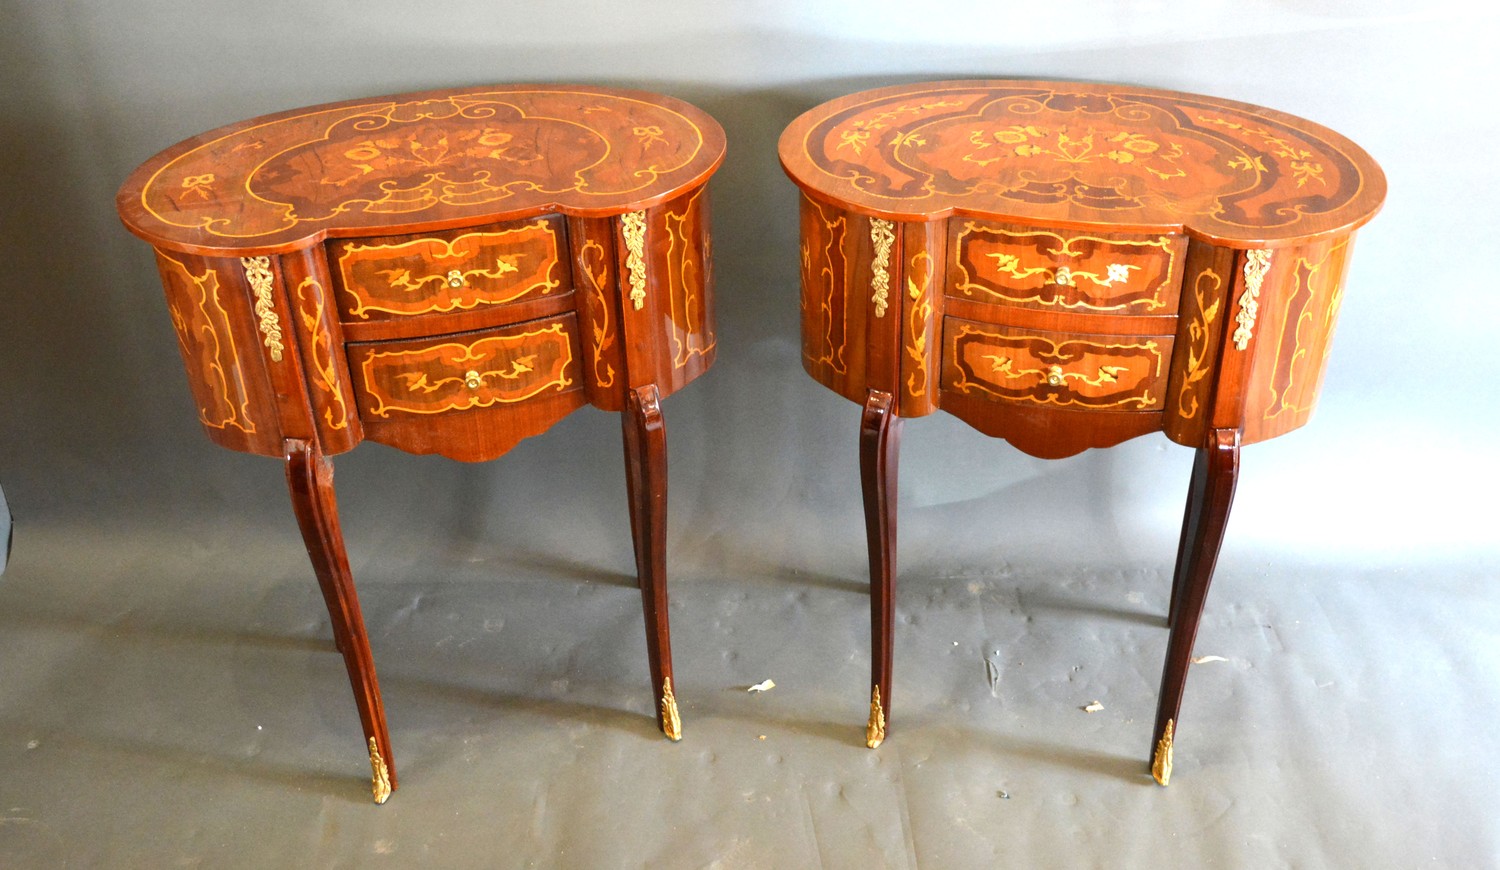 A pair of French style Marquetry inlaid and gilt metal mounted kidney shaped side tables, each